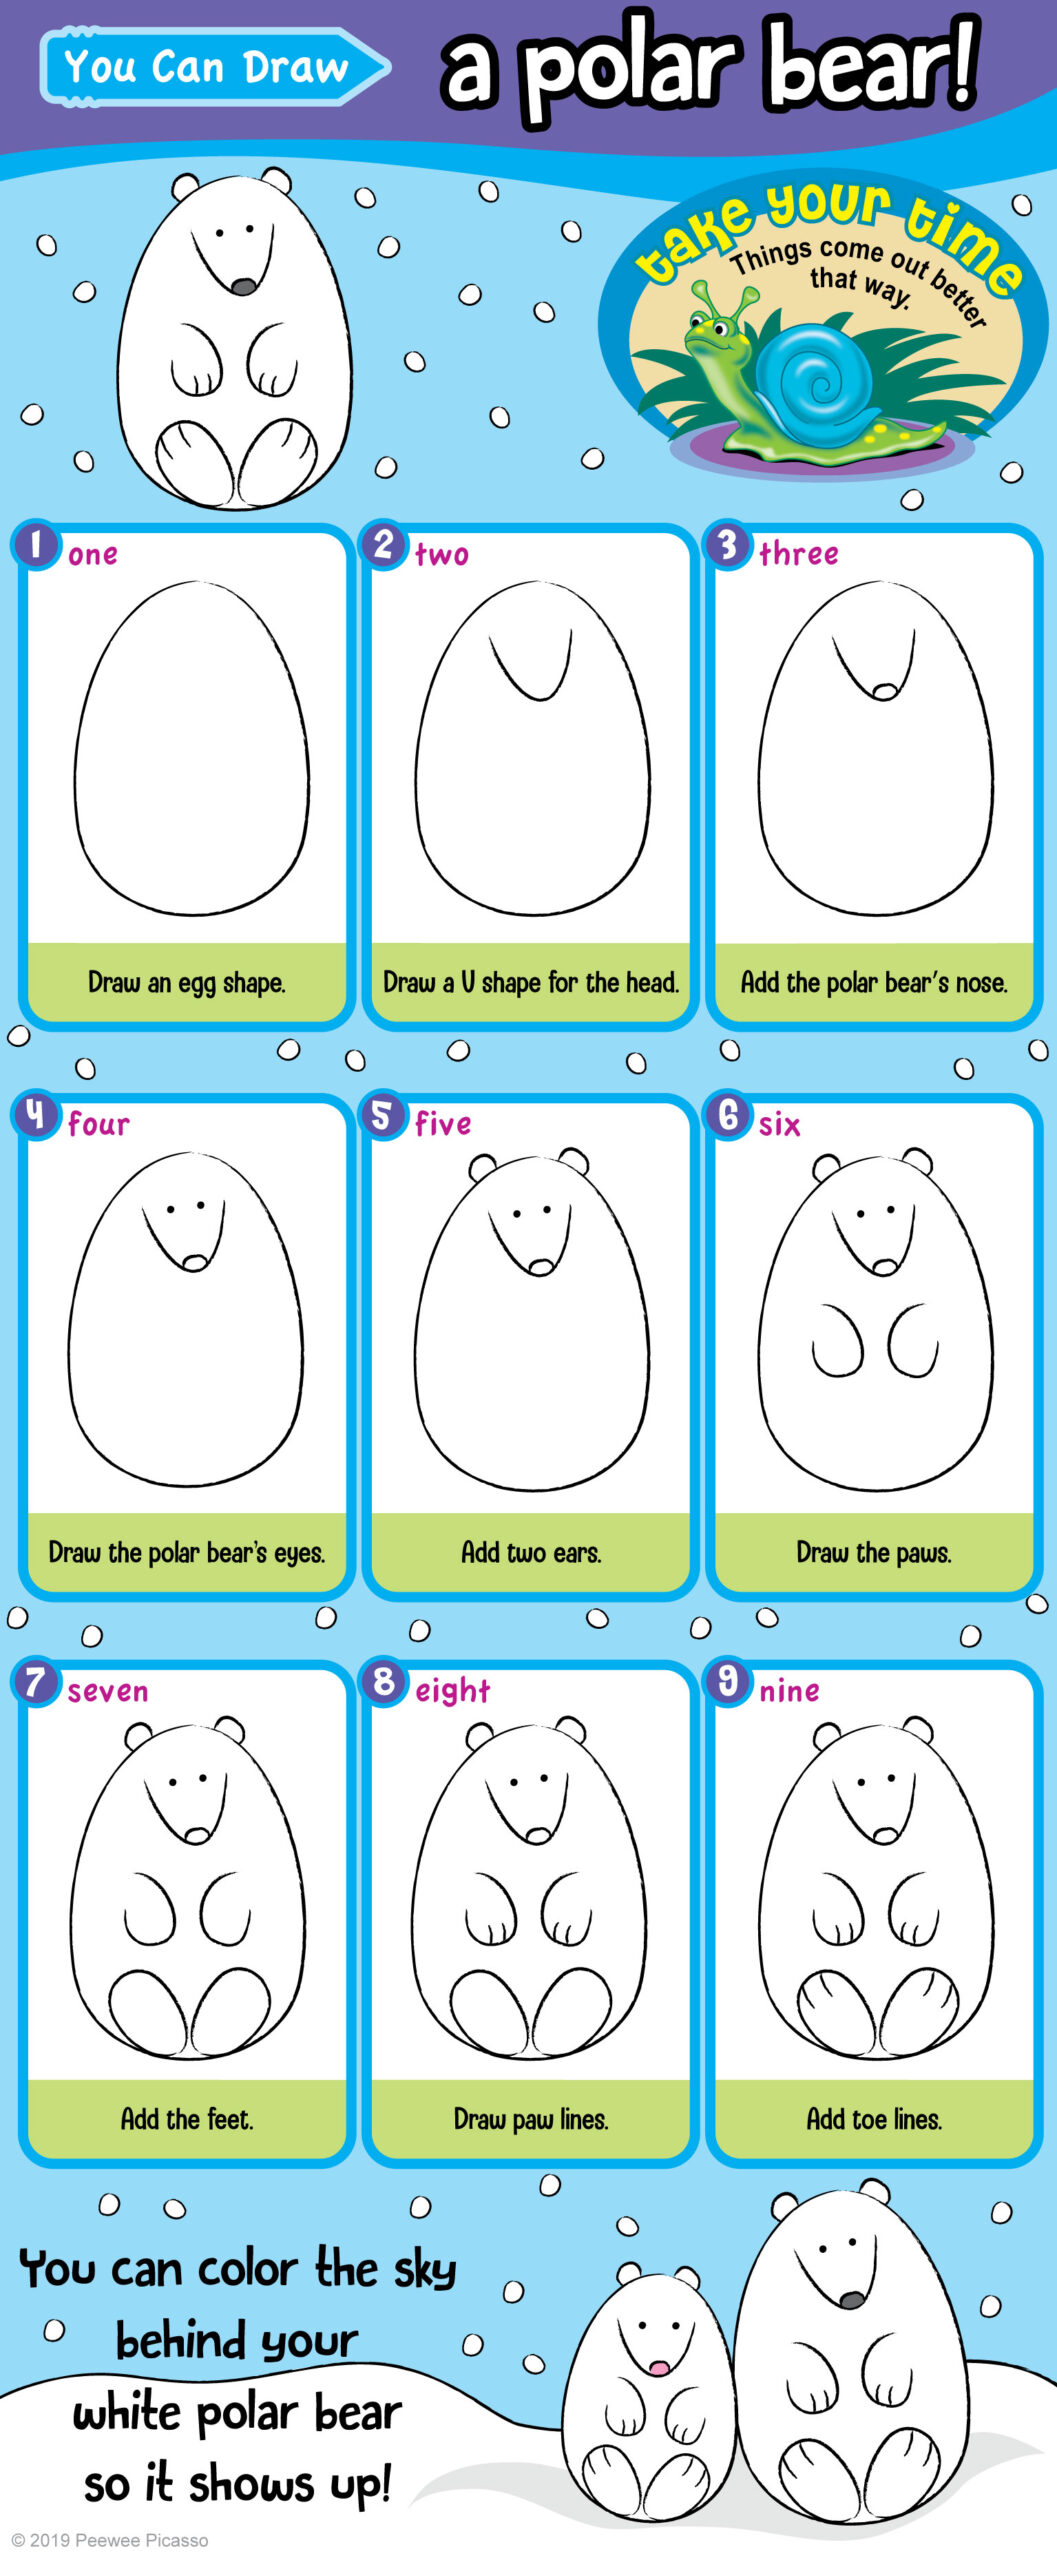 how to draw a polar bear for kids easy